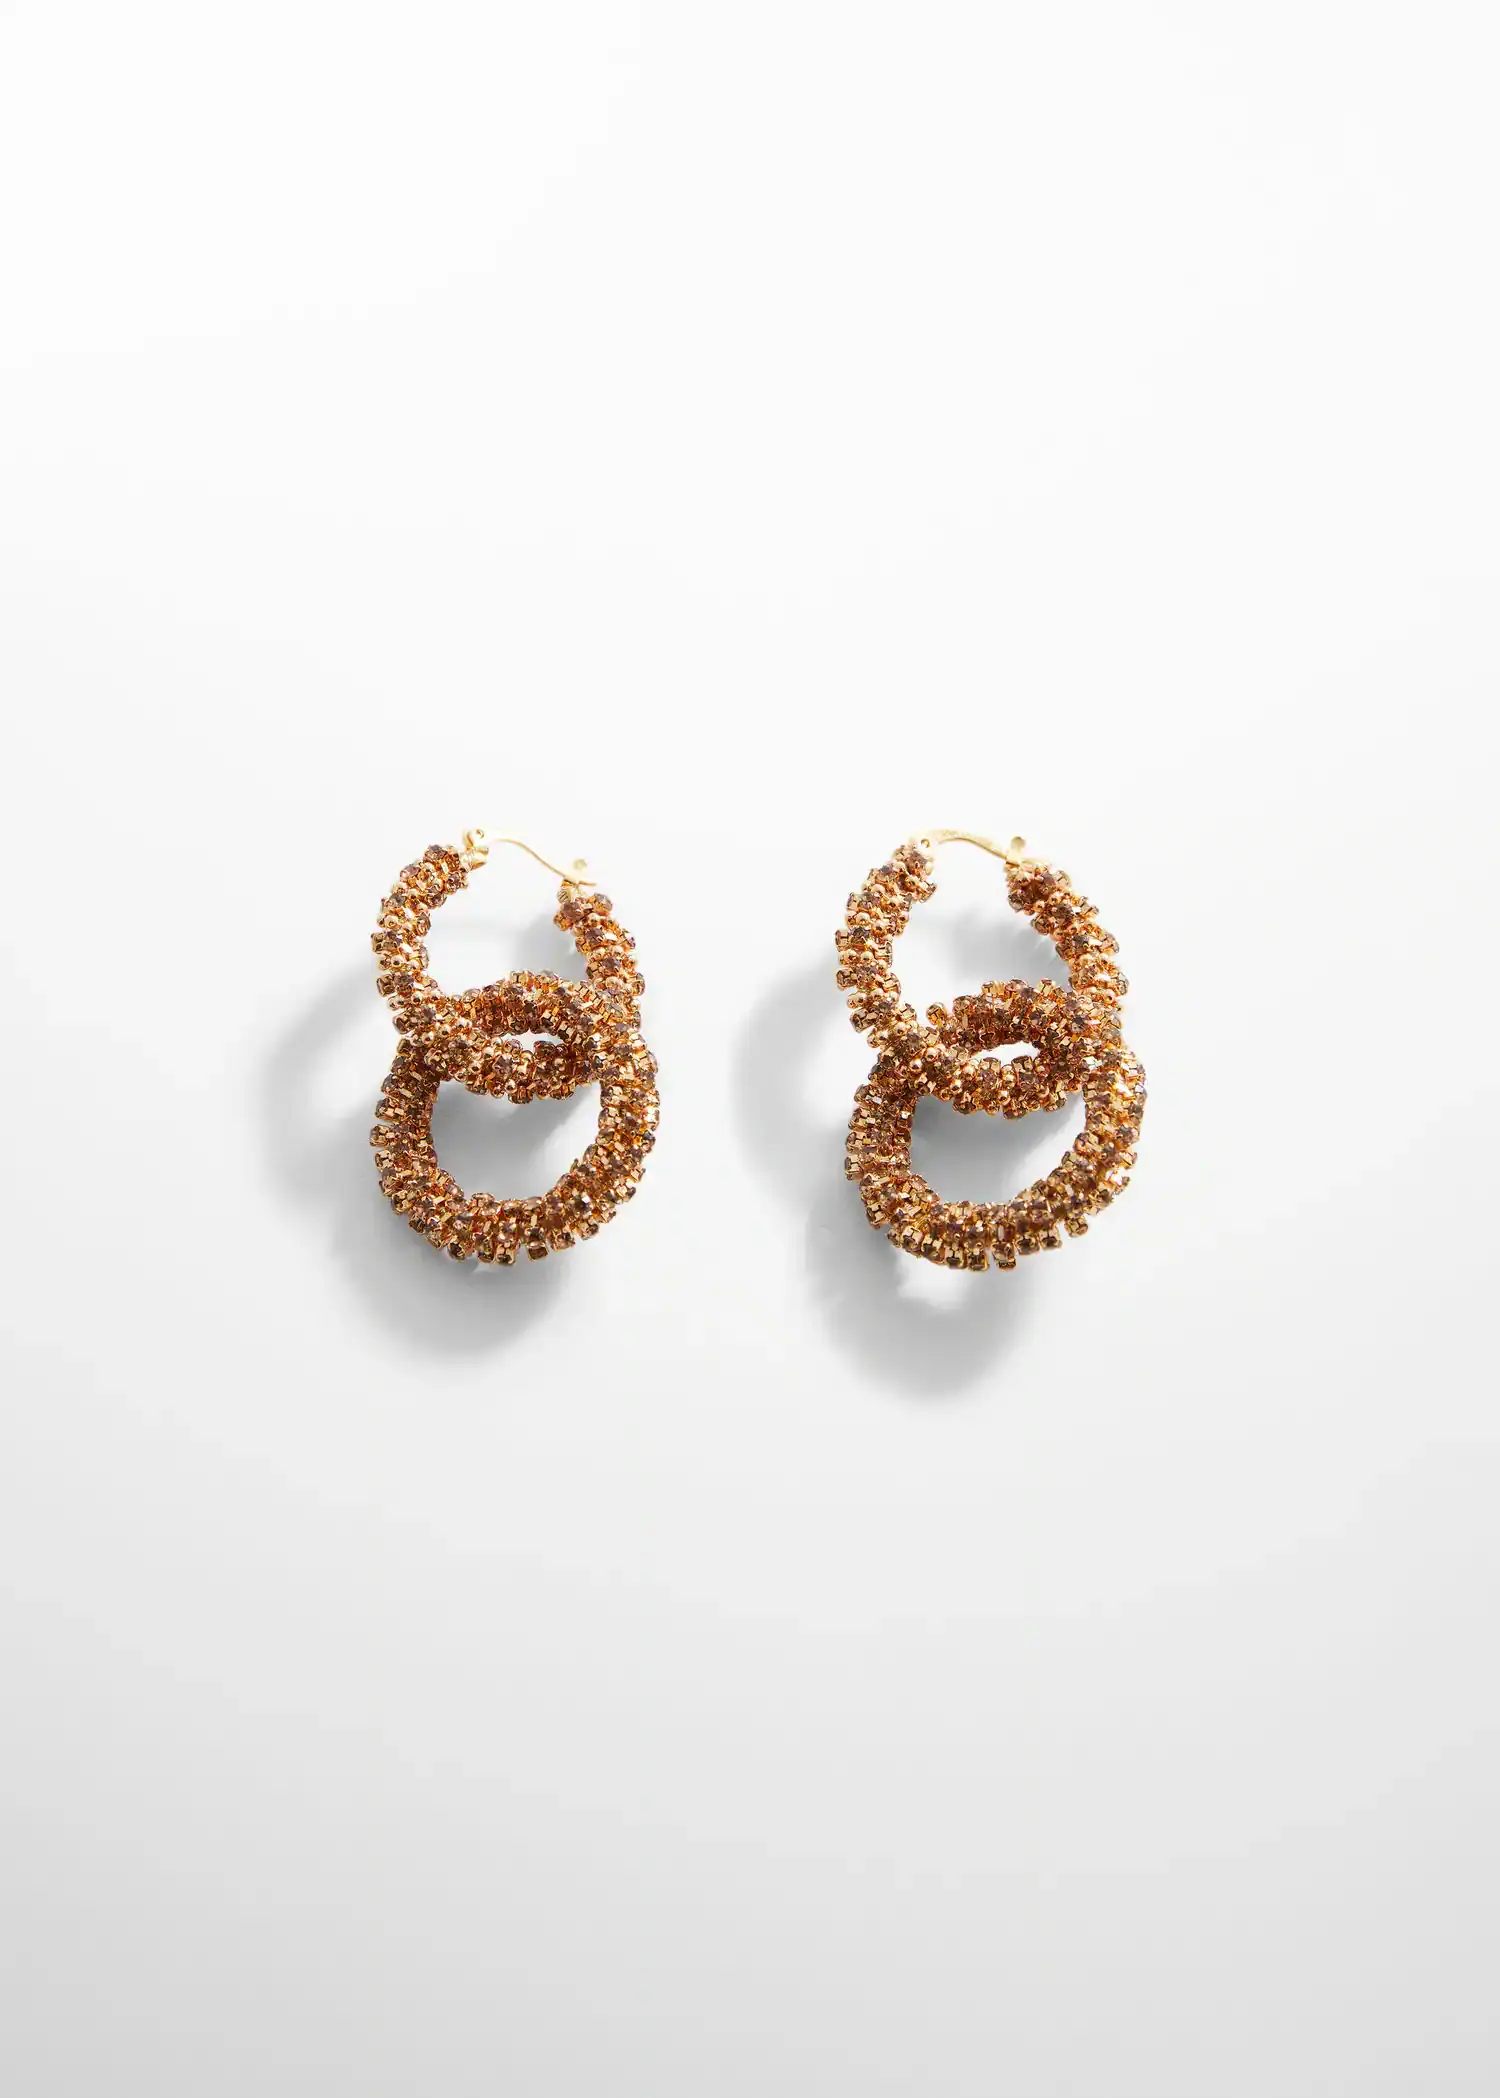 Mango Intertwined hoop earrings. a pair of earrings that are made out of beads. 